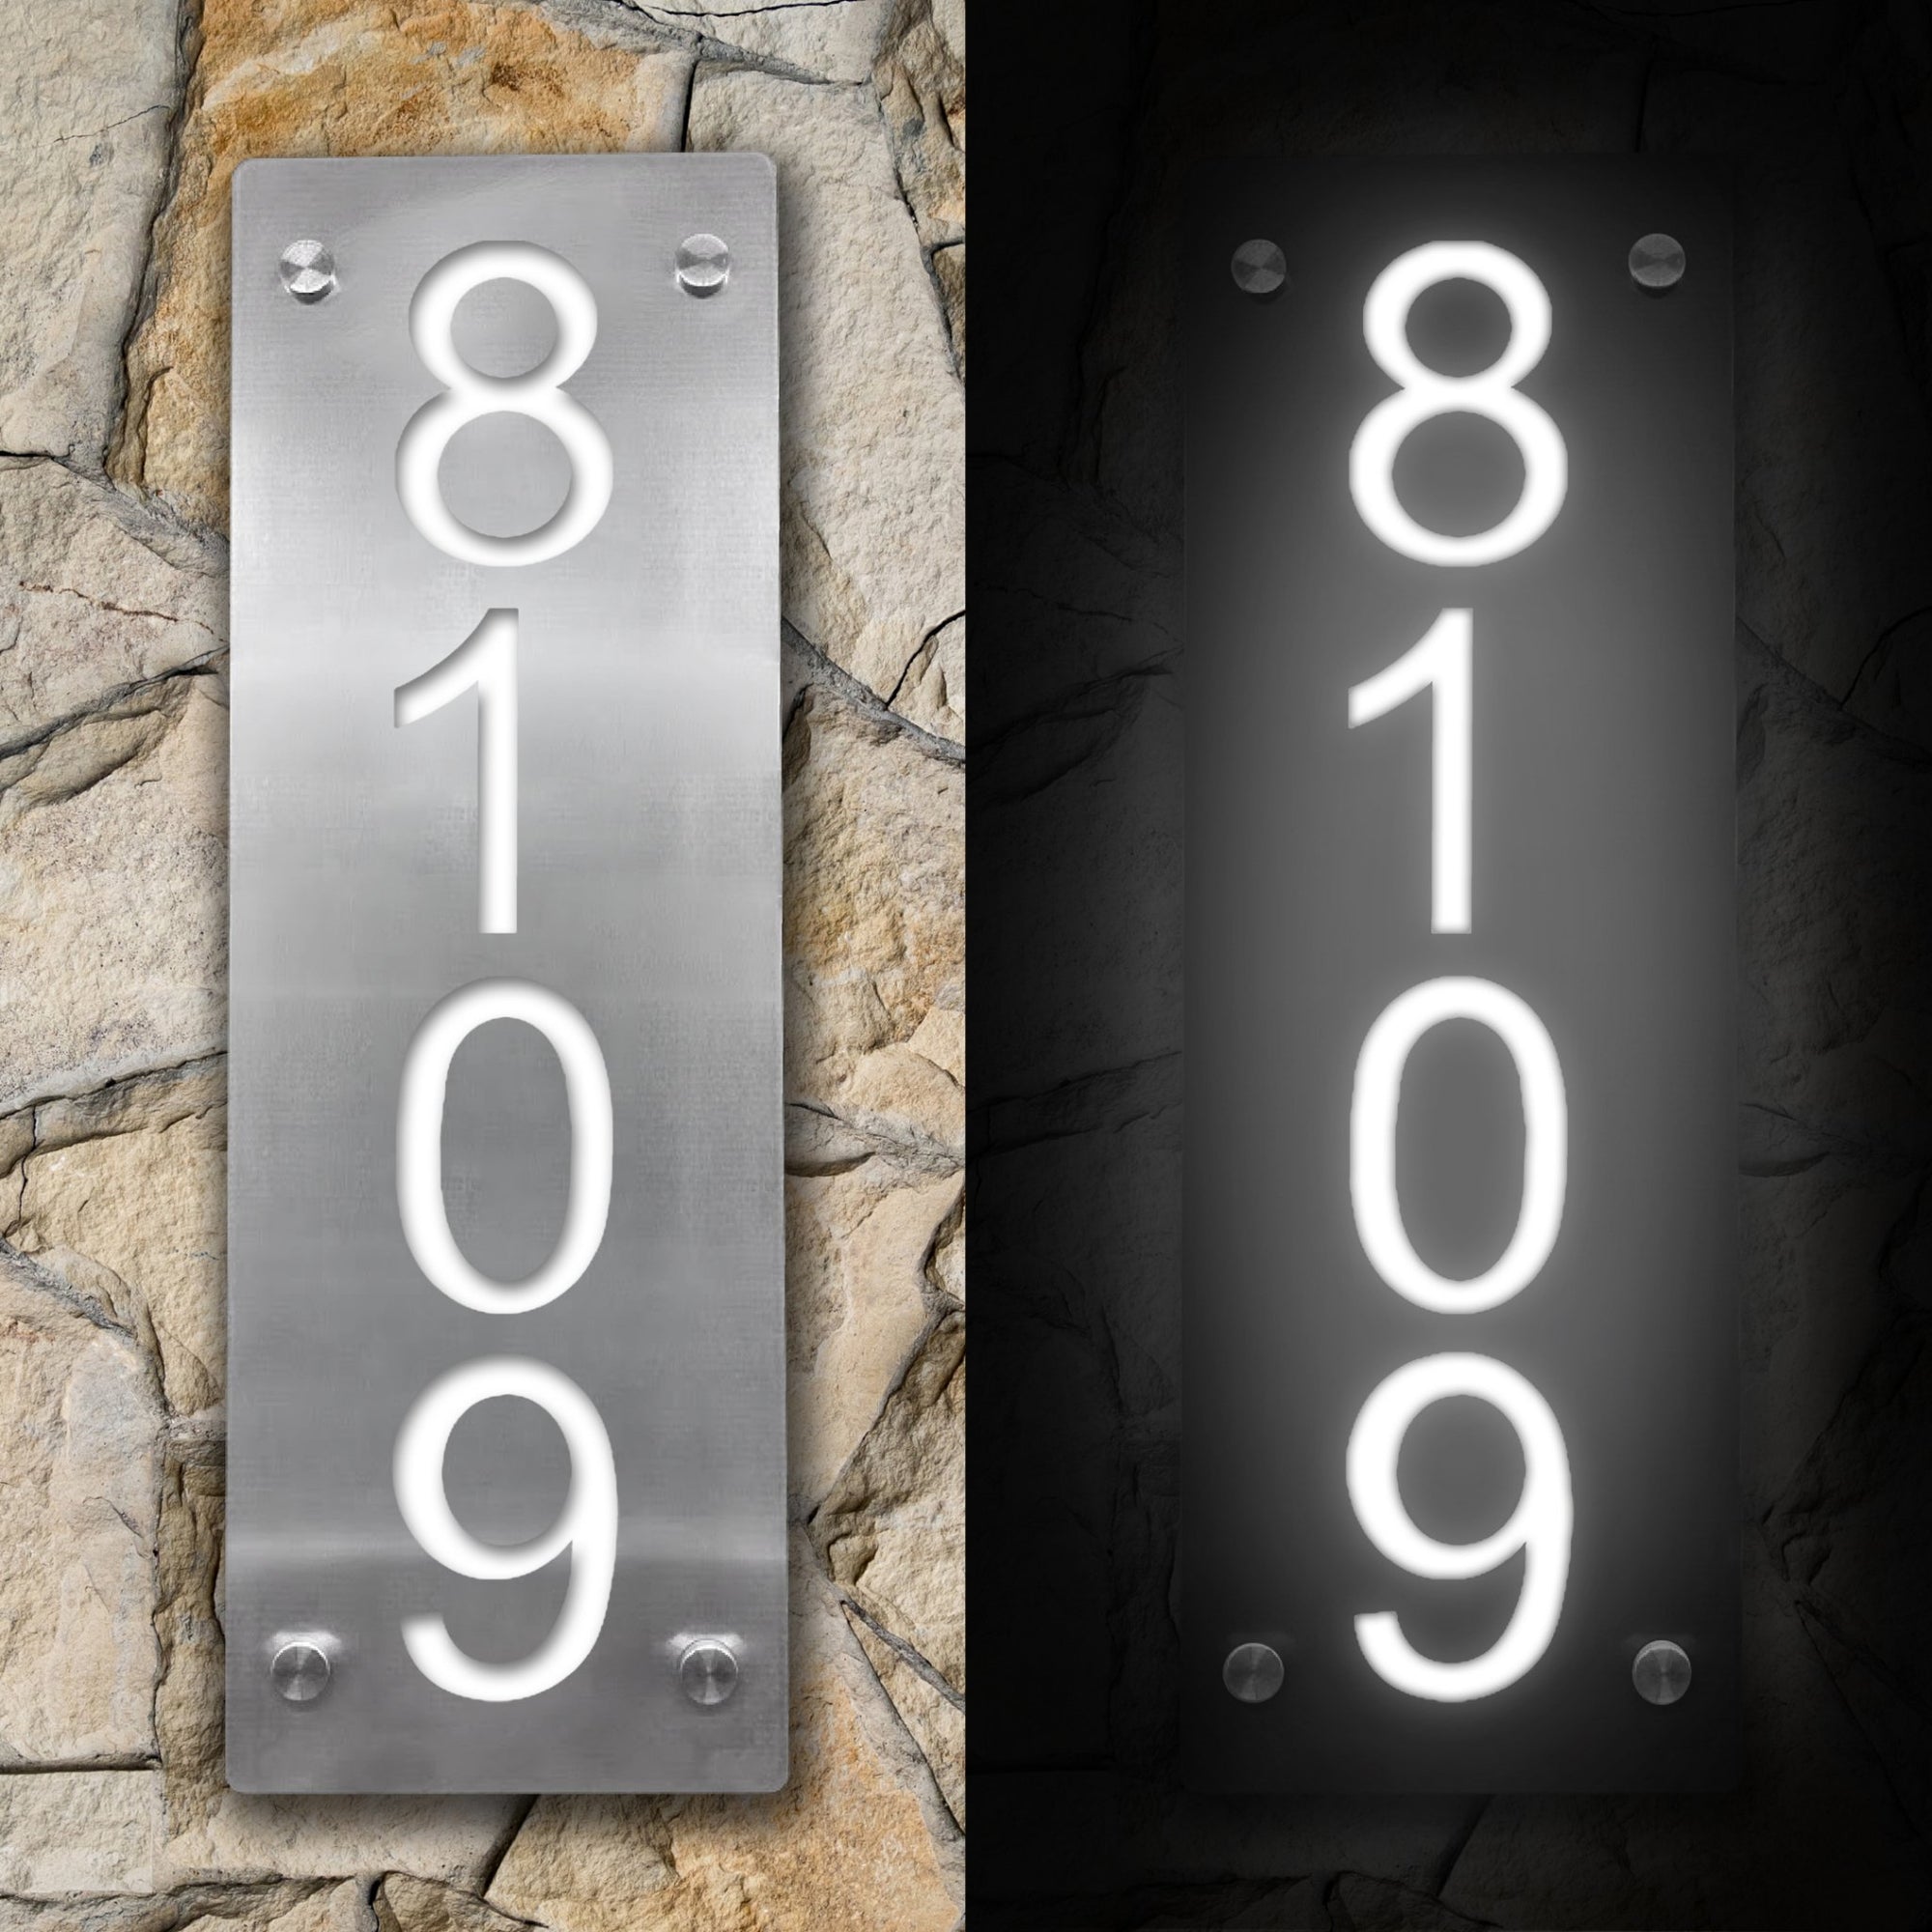 Solar House Numbers Sign: Illuminates Your Address - Customizable, Weather-Resistant, Handcrafted in the USA, Various Sizes, Easy Installation, Quality Assurance, Custom-Made, No Returns.